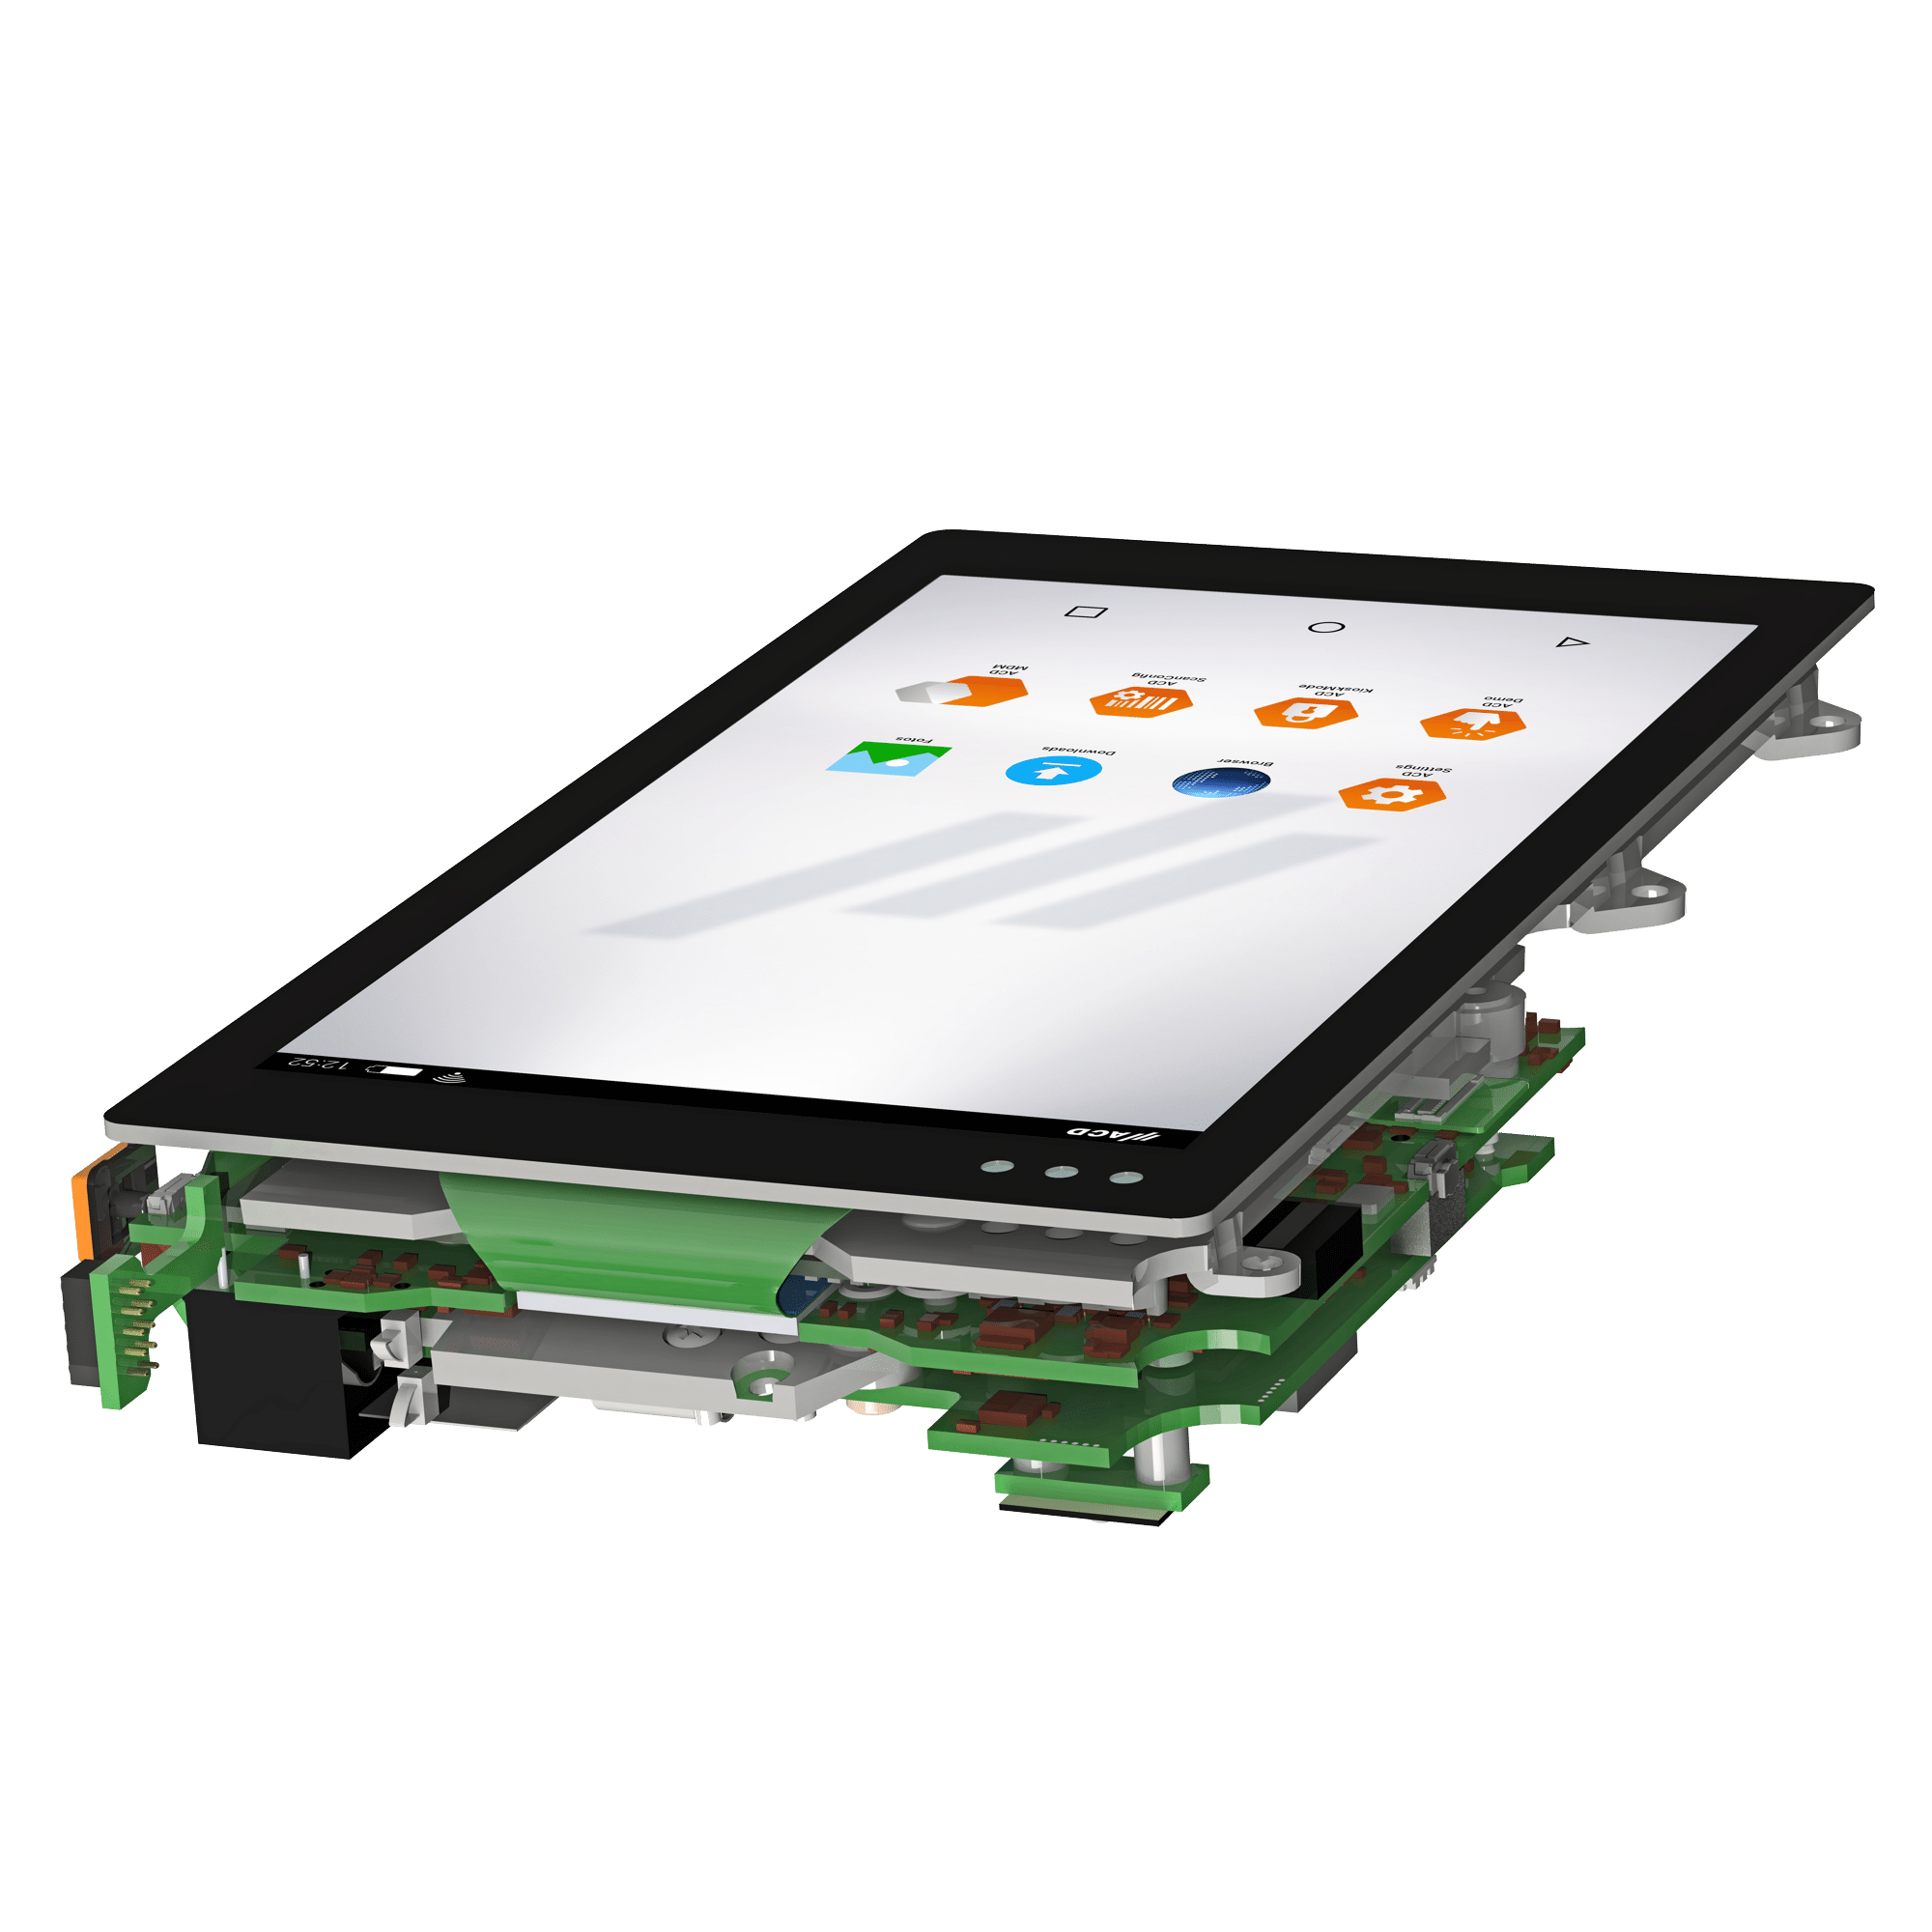 Device design of an Android HMI device developed with the Android Device Kit modular device platform.